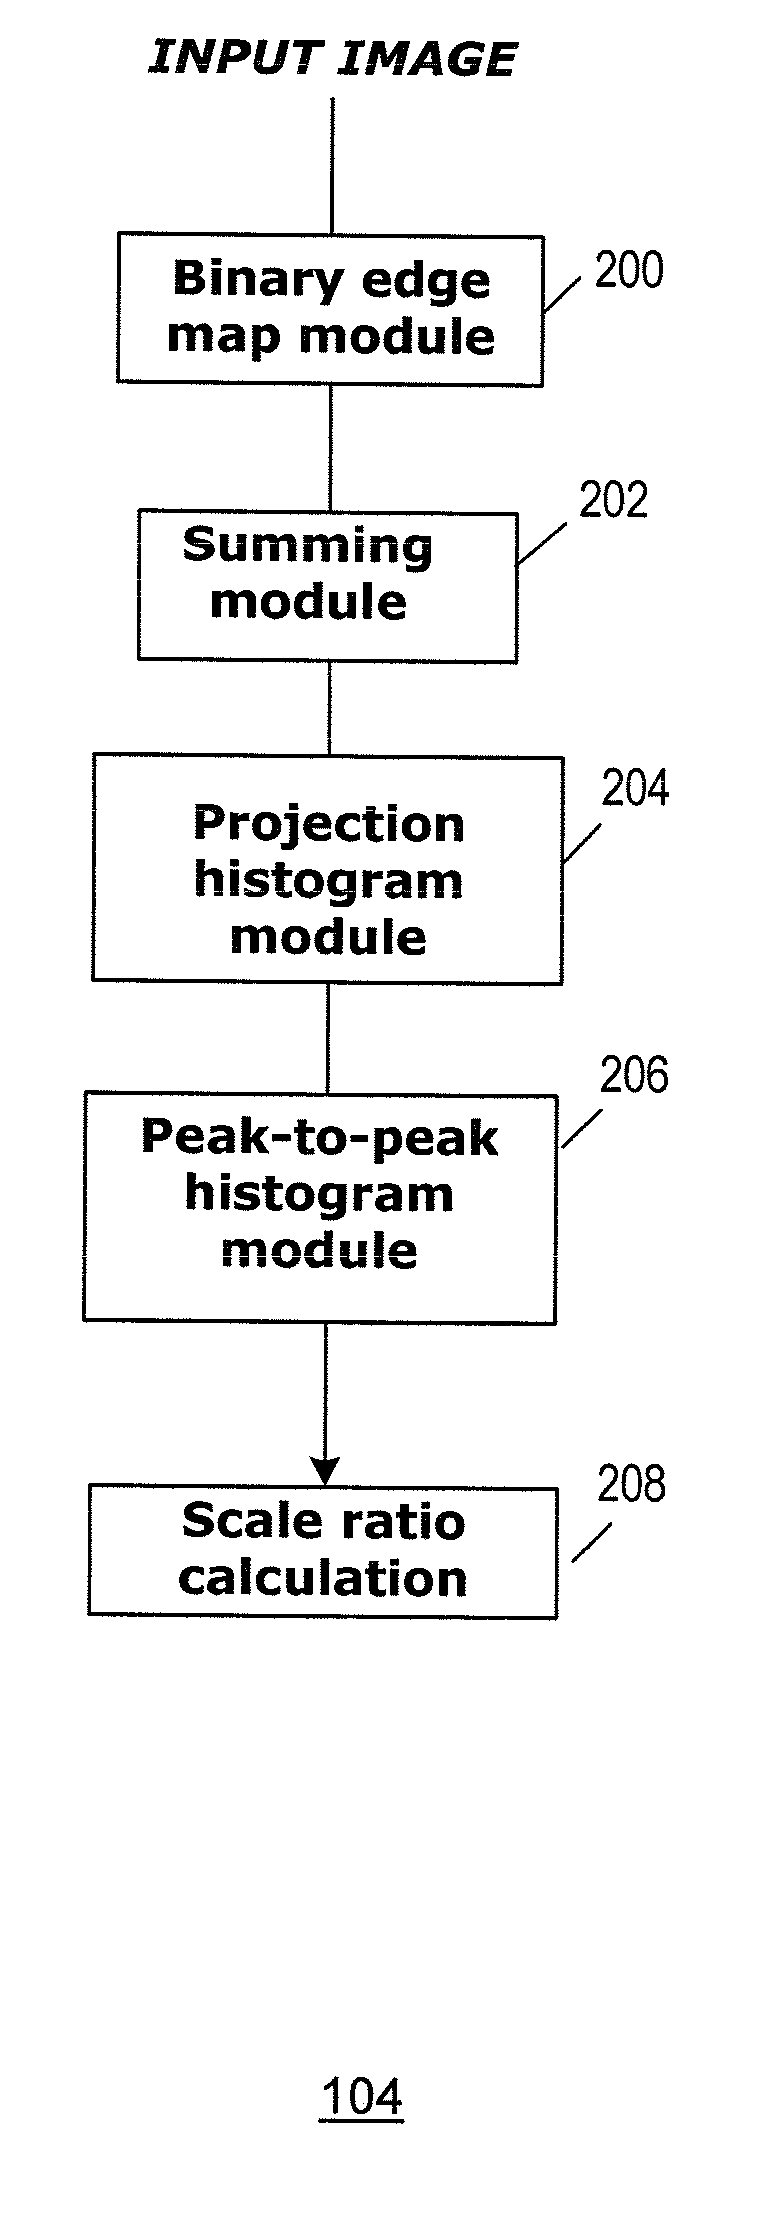 Method and system for image scaling detection